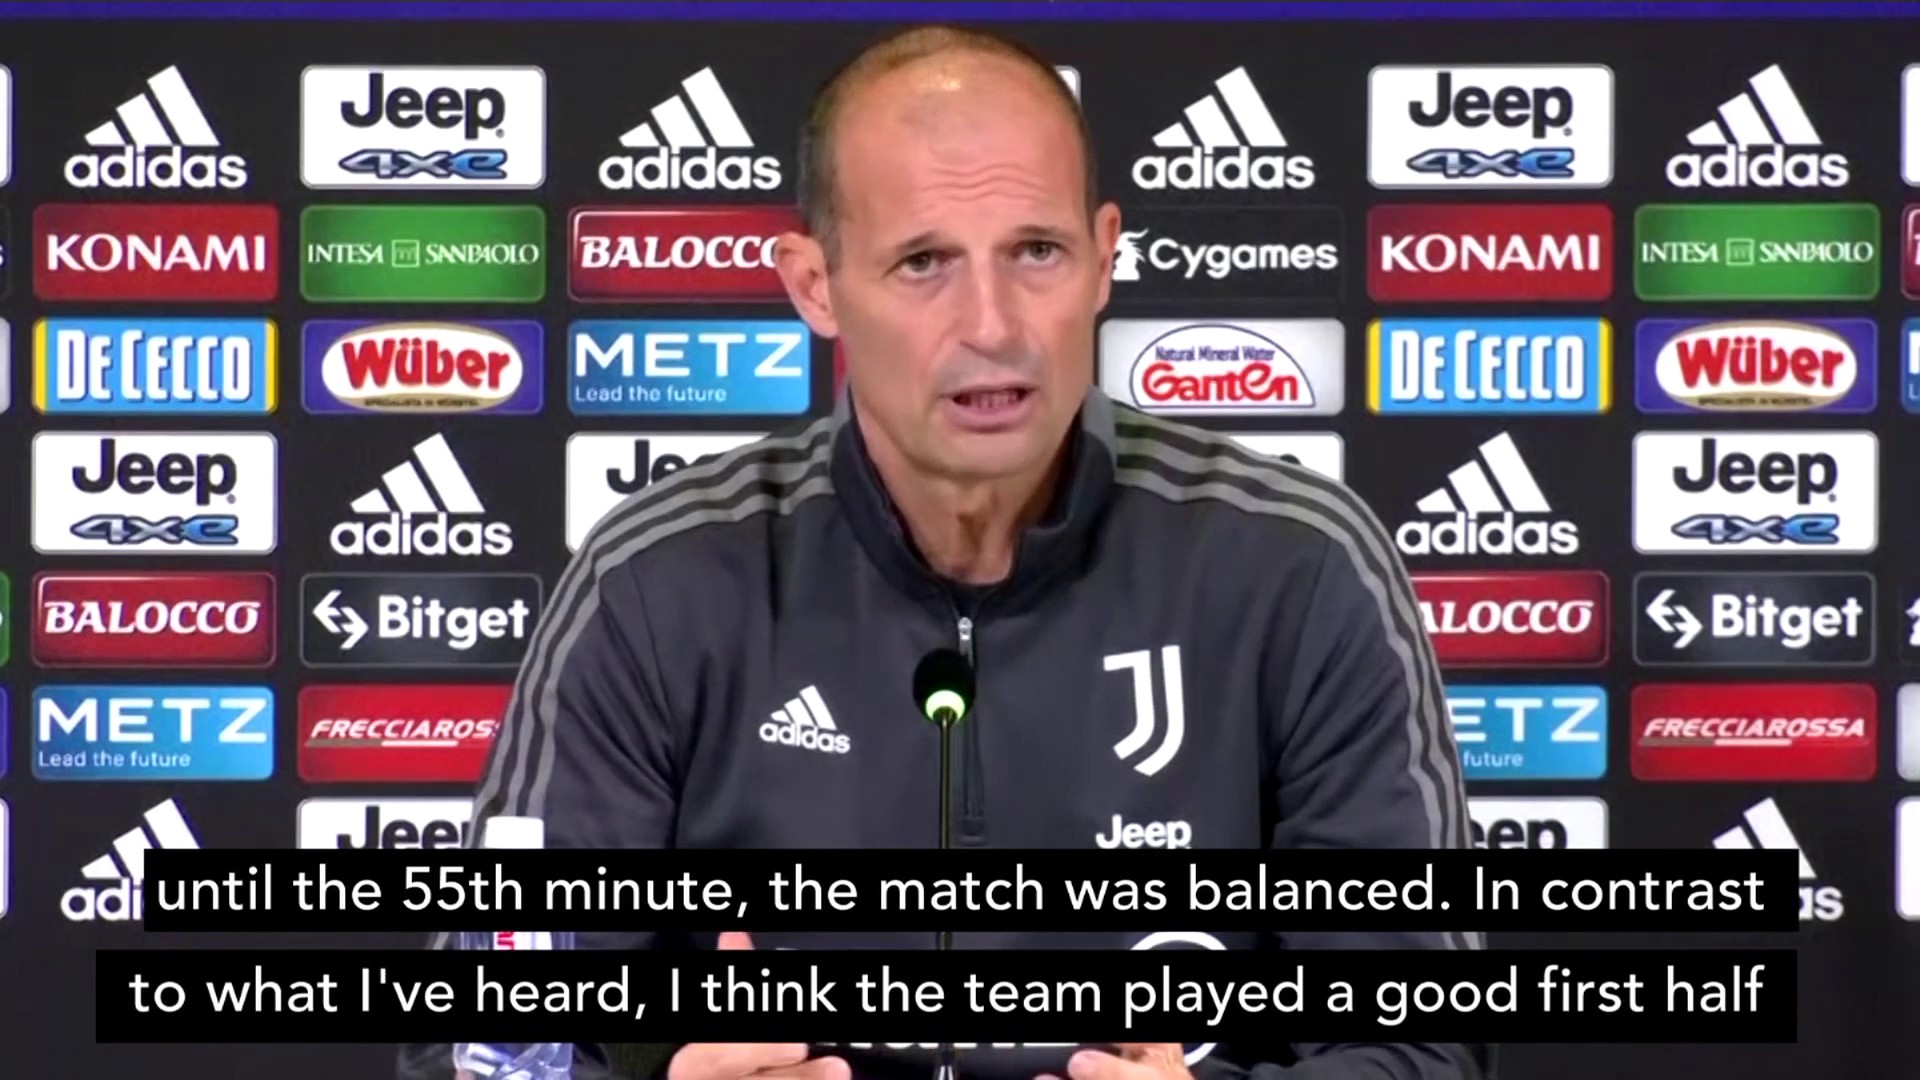 "We are Juventus. Such a bad performance is not good" Allegri after Chelsea mauling